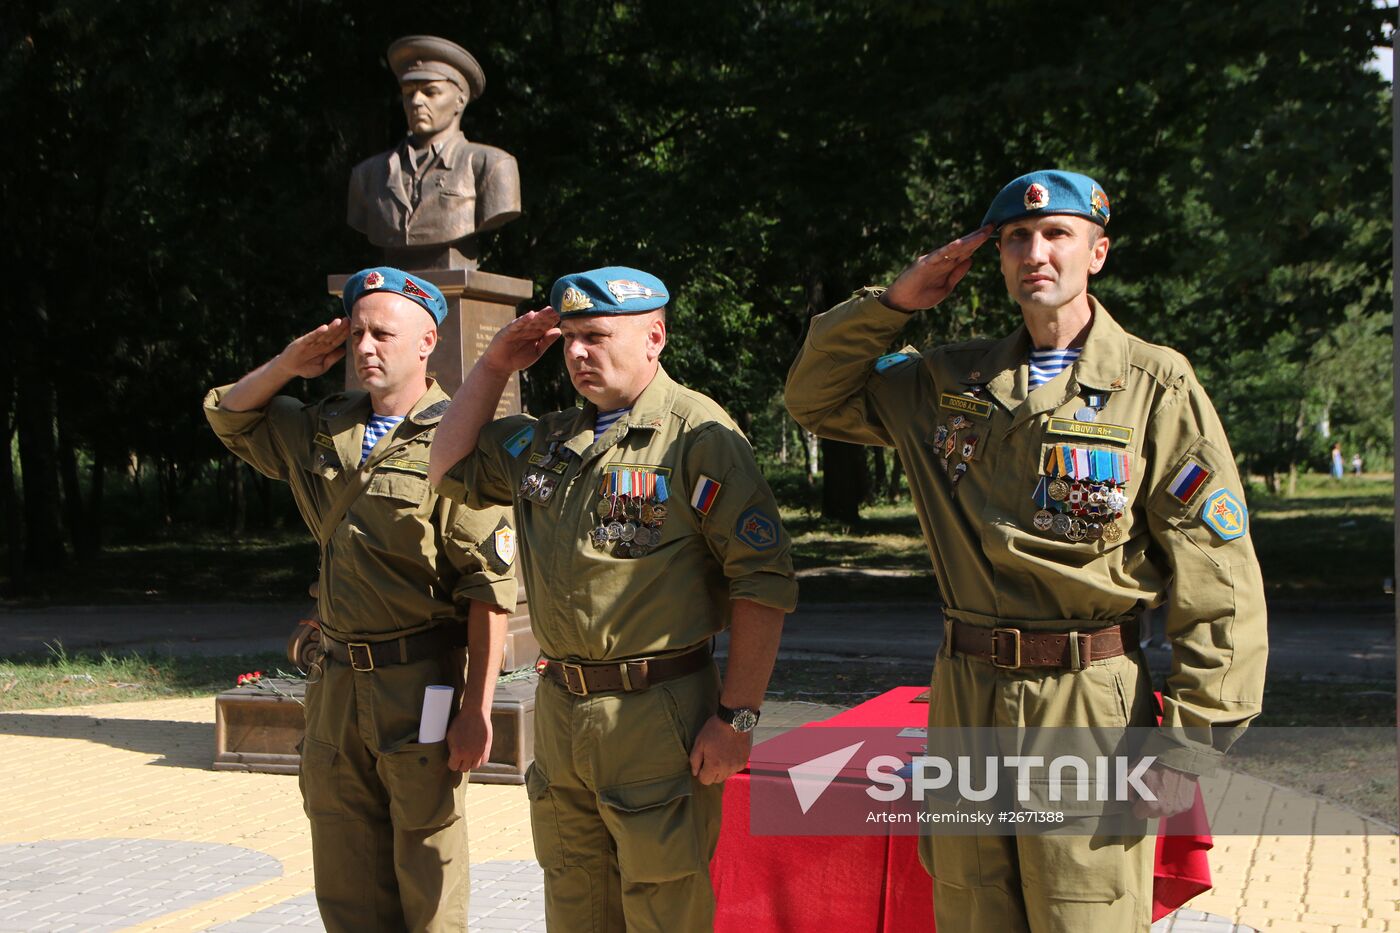 Airborne Force Day celebrations across Russia